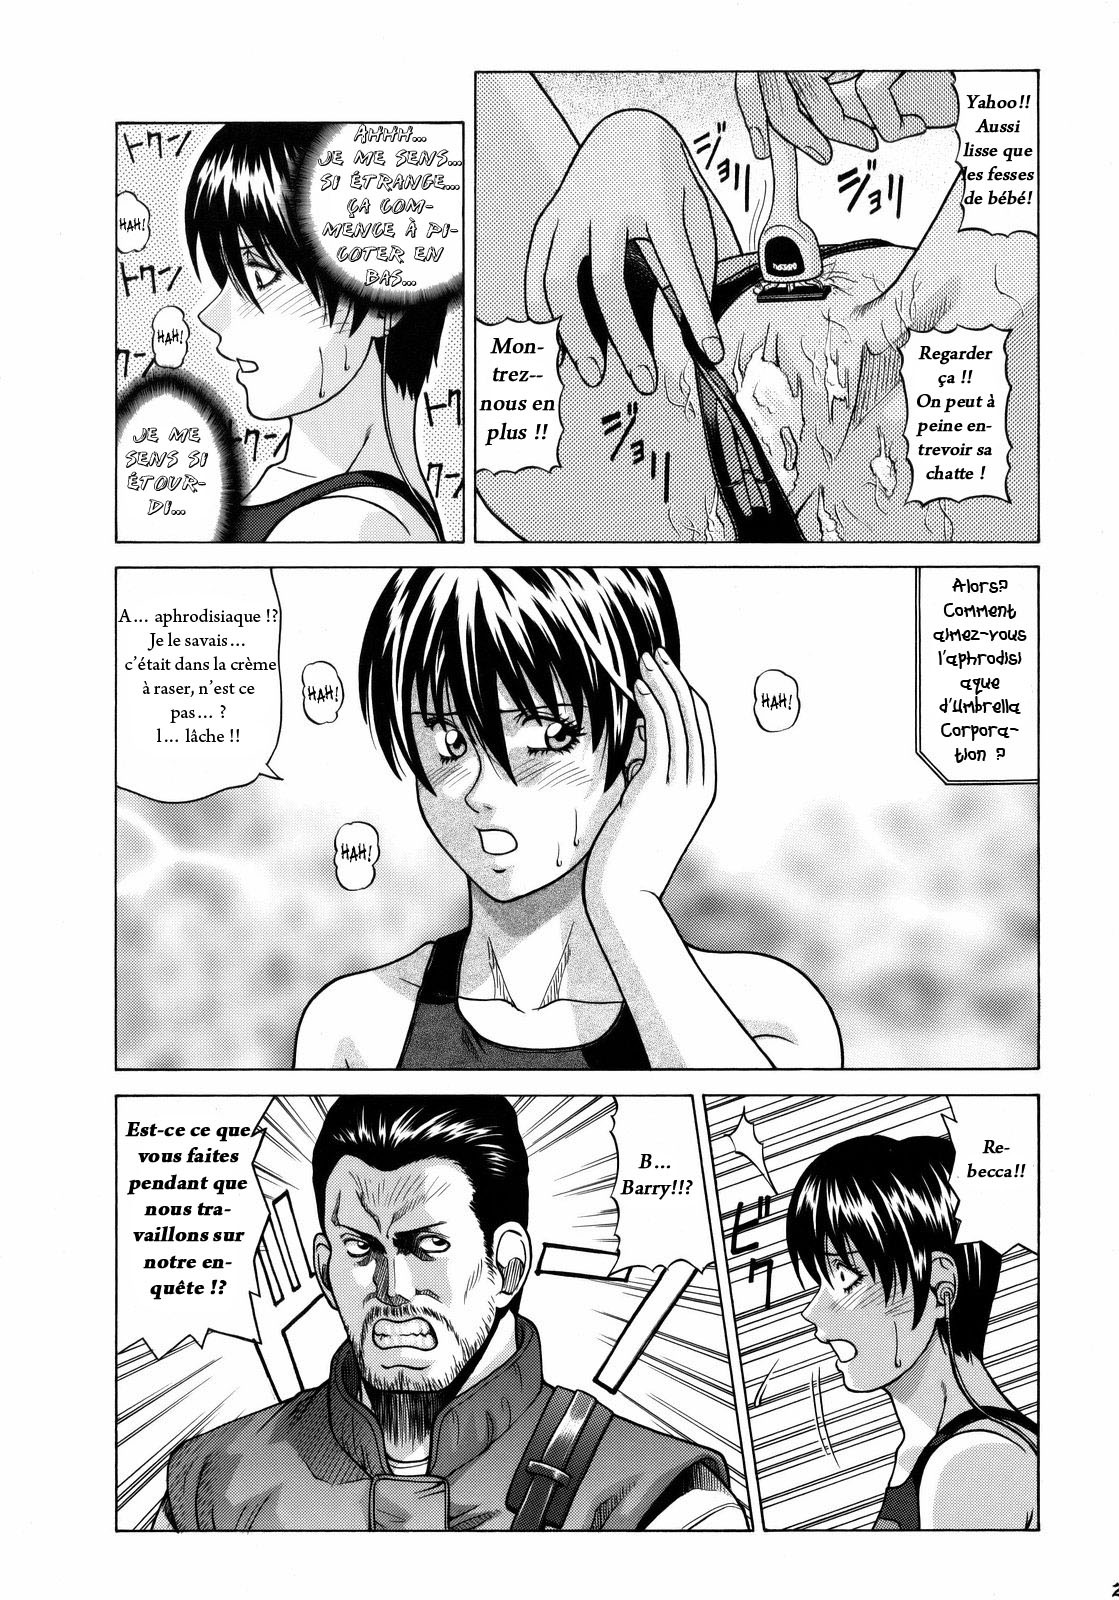 (C75) [Human High-Light Film (Jacky Knee-san)] Rebecca Chambers (Resident Evil) [French] page 20 full